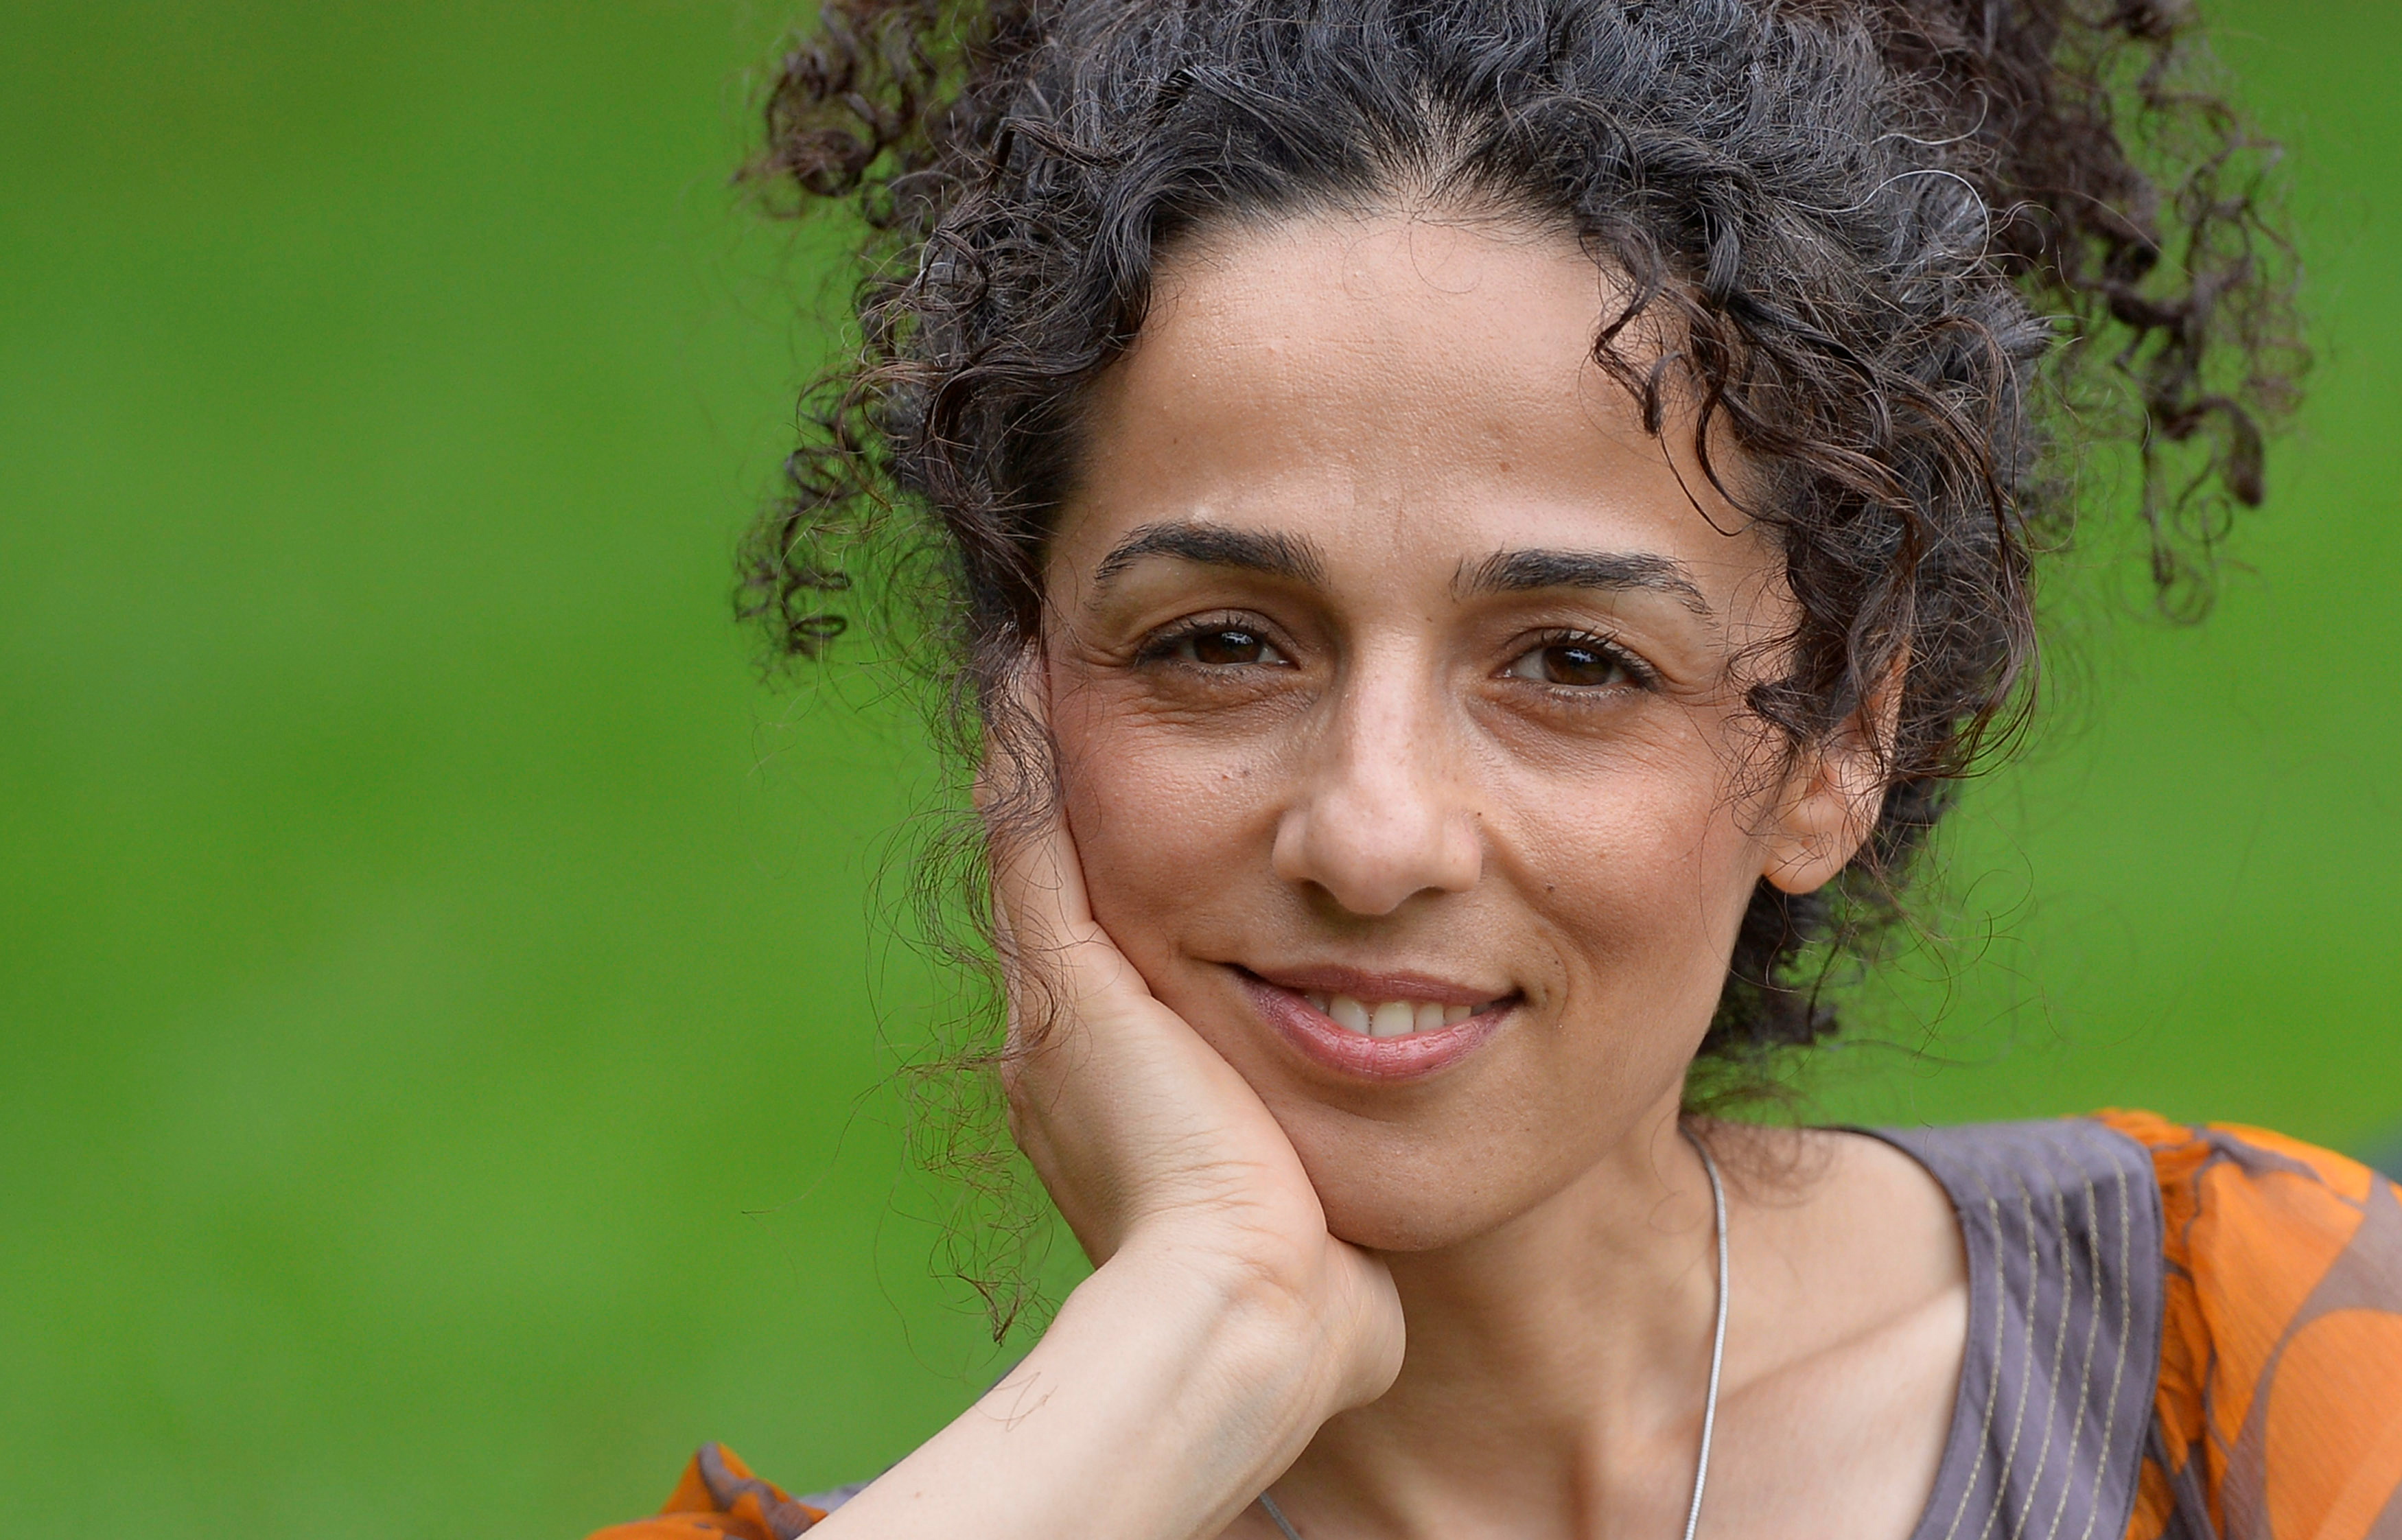 Britain-based Iranian journalist Alinejad poses for a portrait in London